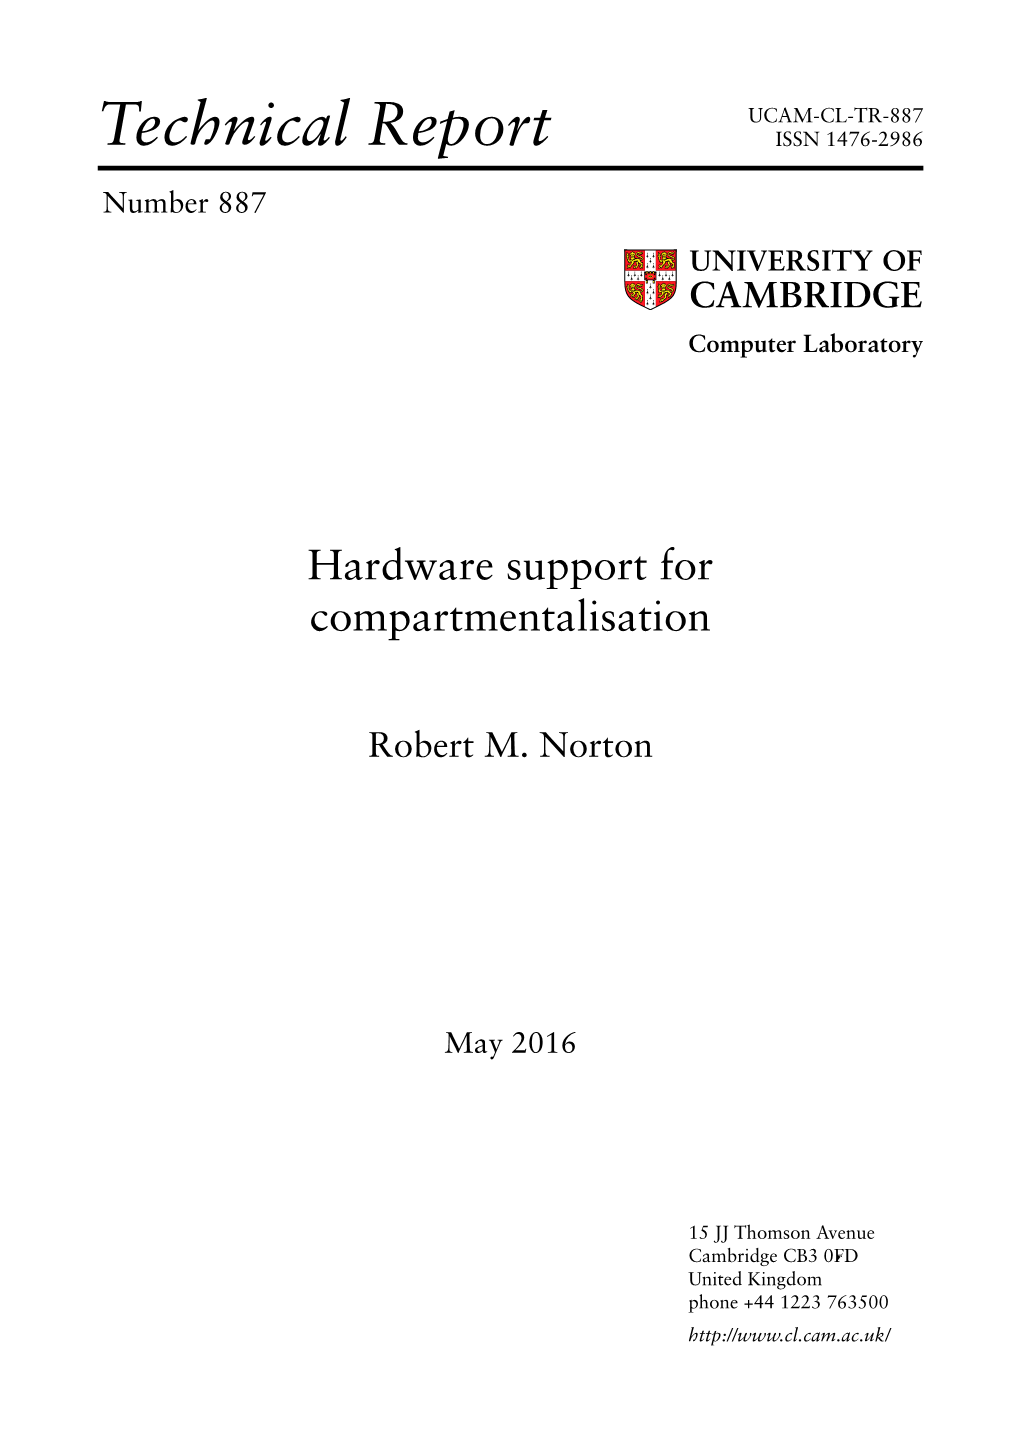 Hardware Support for Compartmentalisation